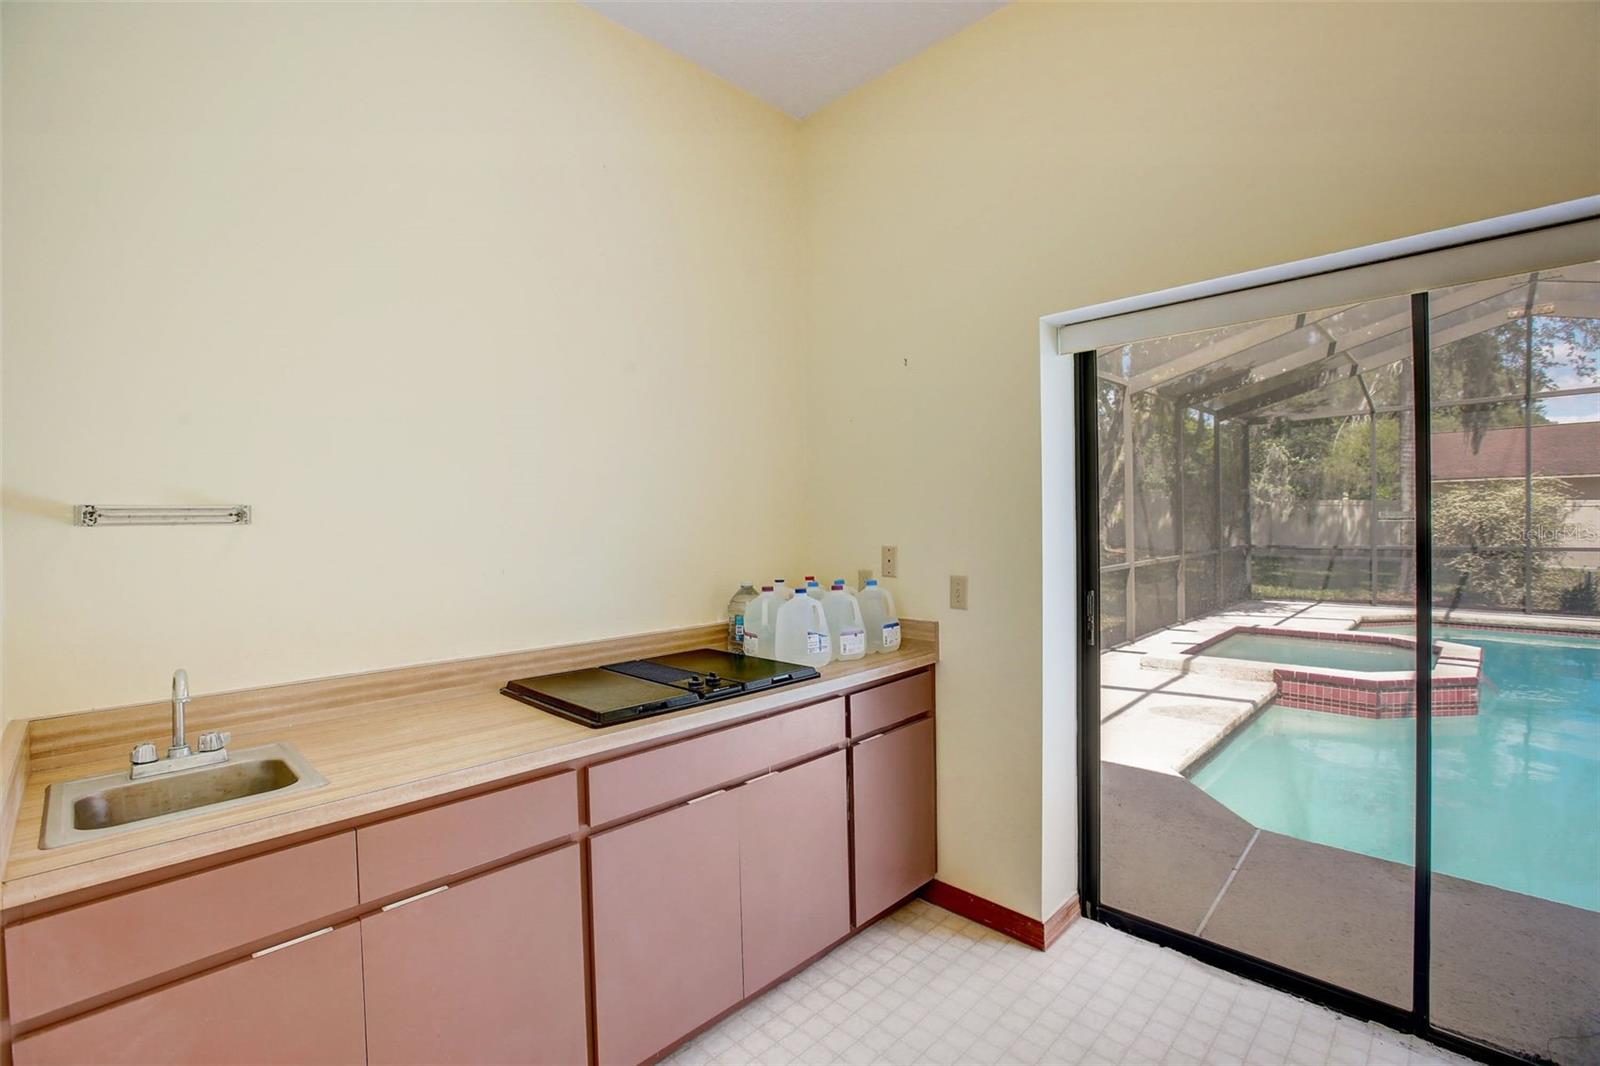 Pool room with indoor grill